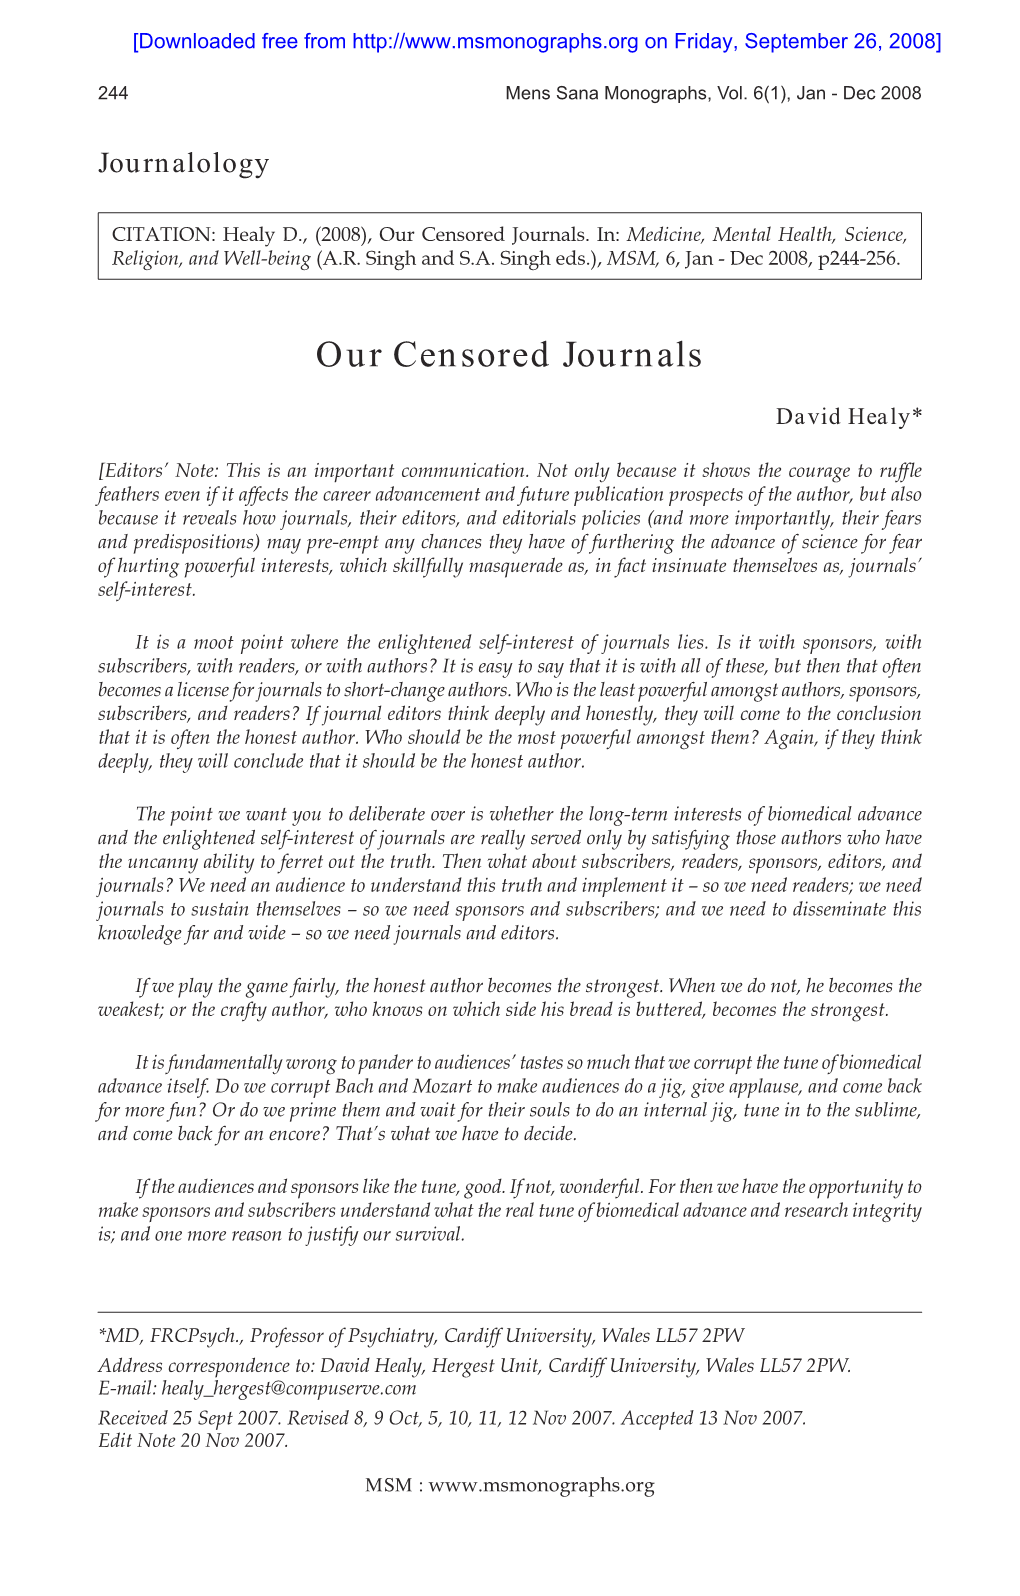 Our Censored Journals